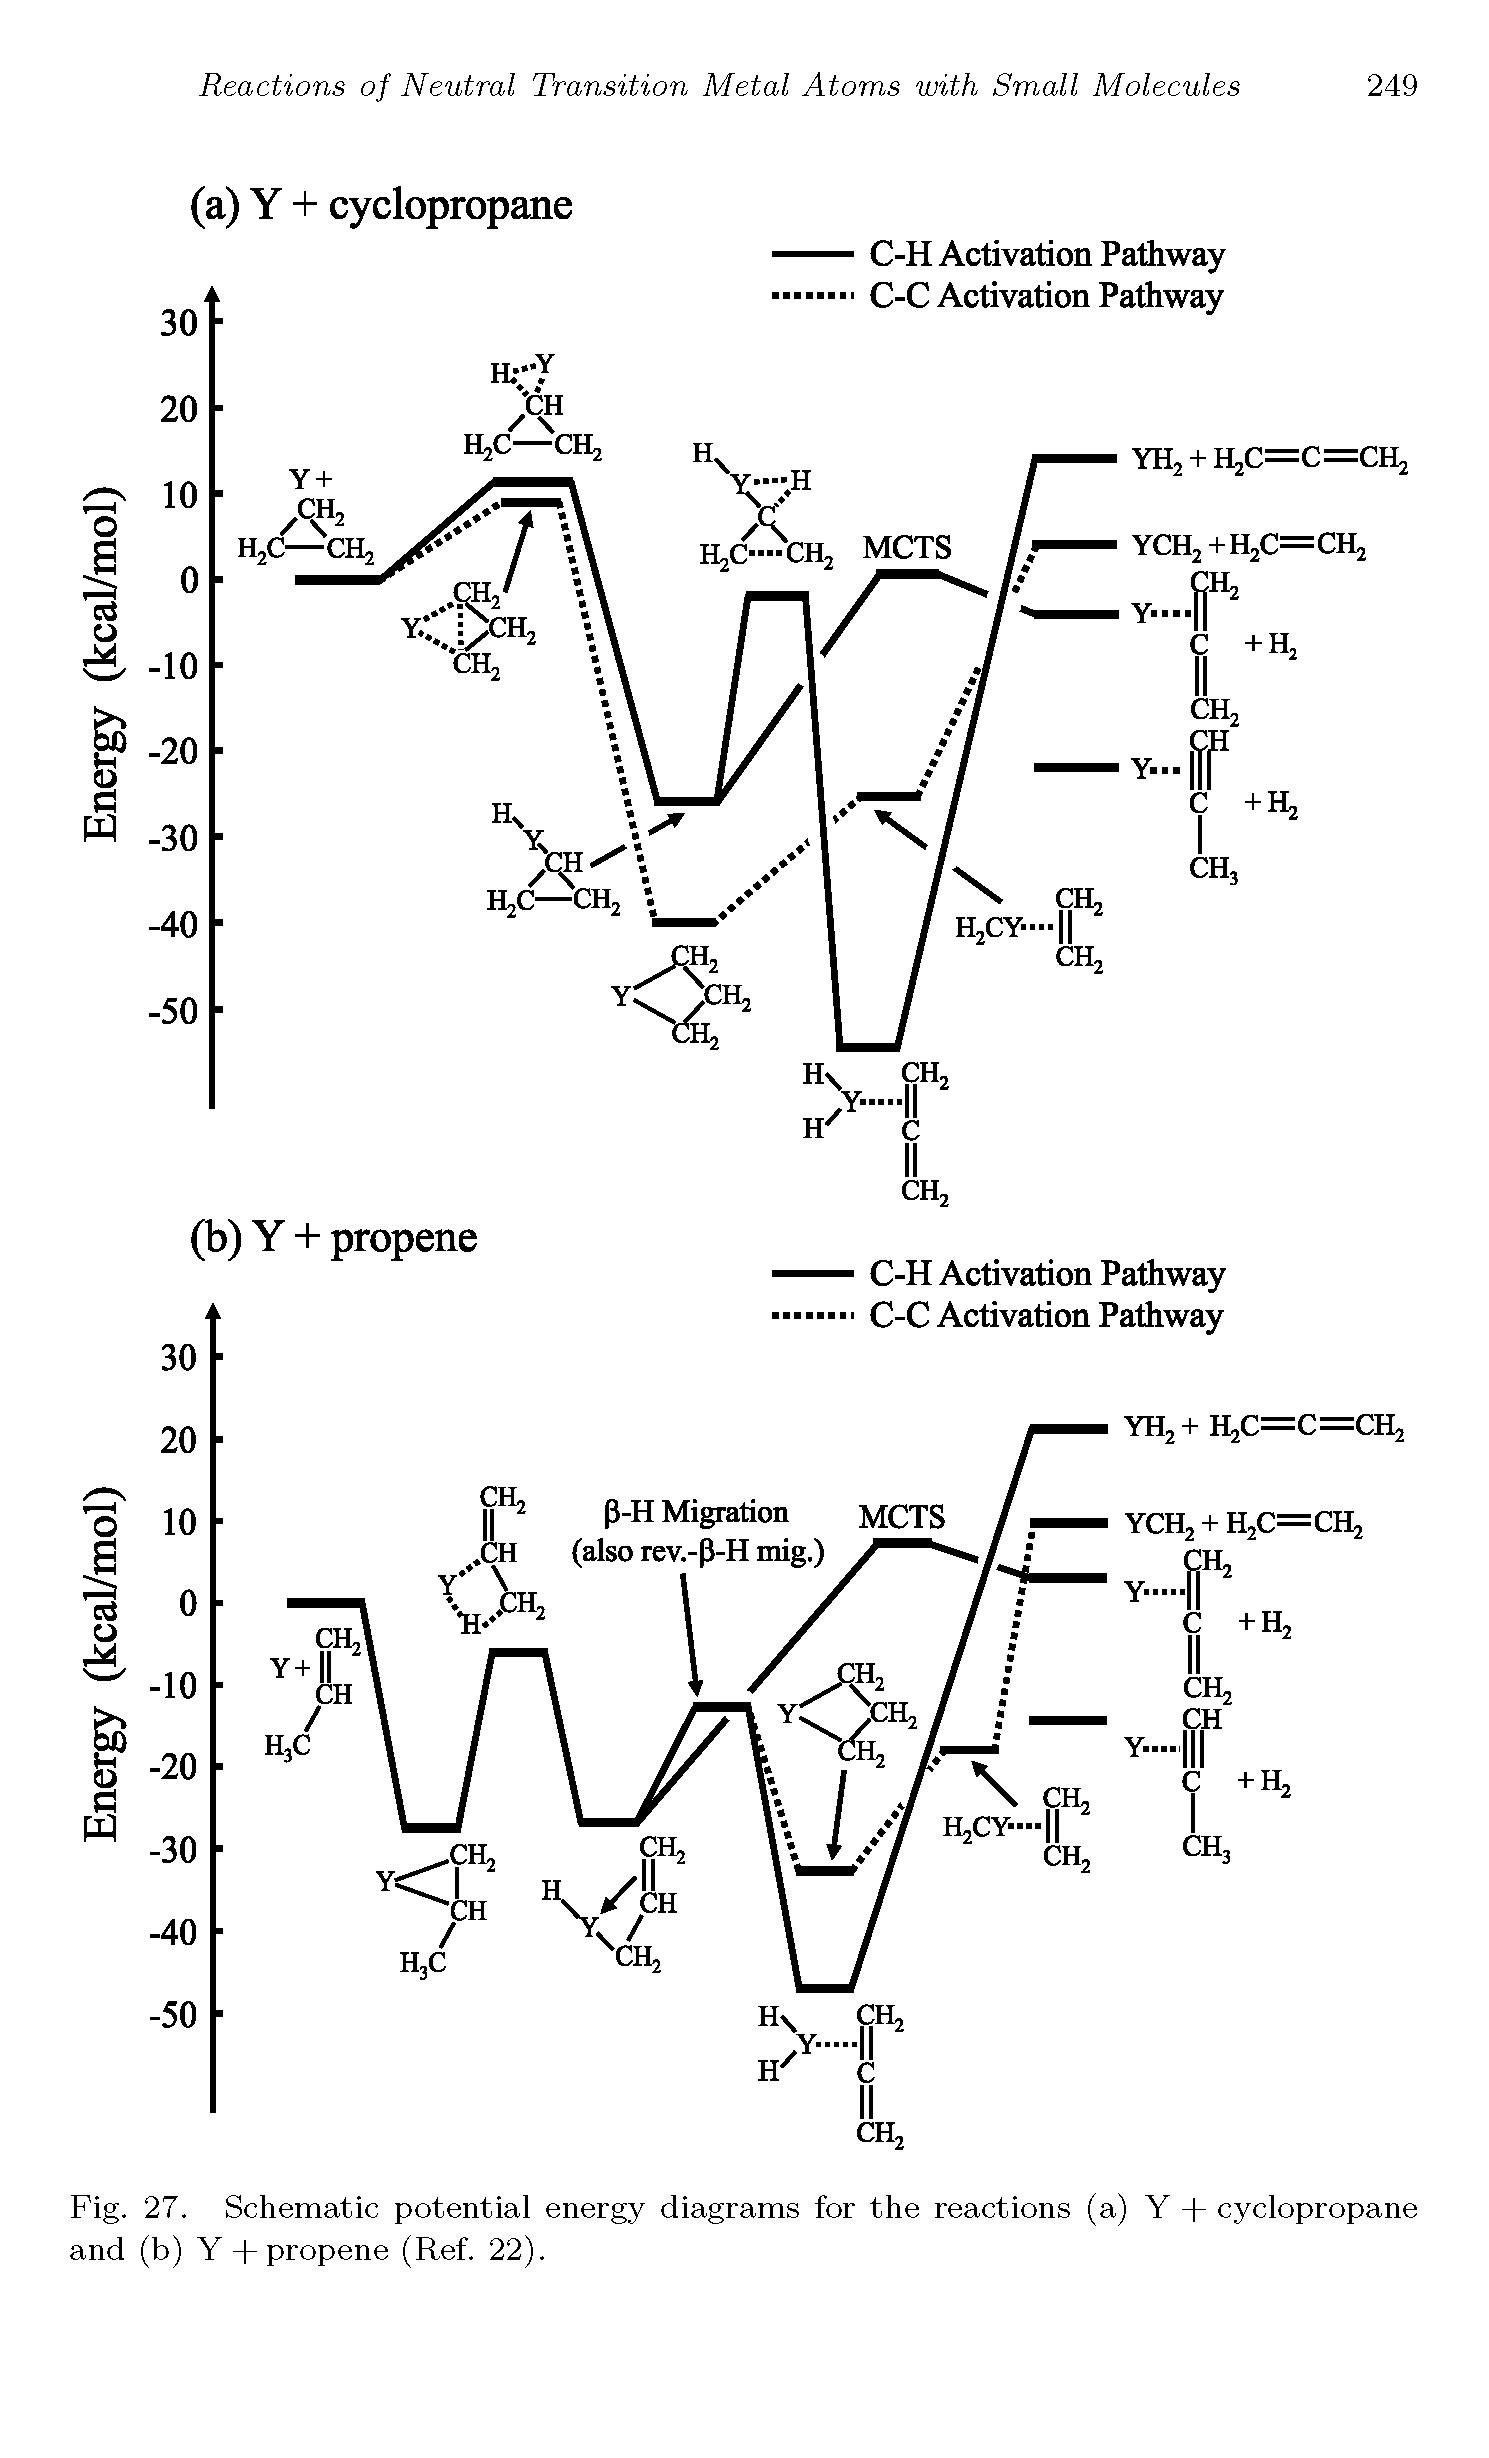 Fig. 27. Schematic potential energy diagrams for the reactions (a) Y + cyclopropane and (b) Y + propene (Ref. 22).